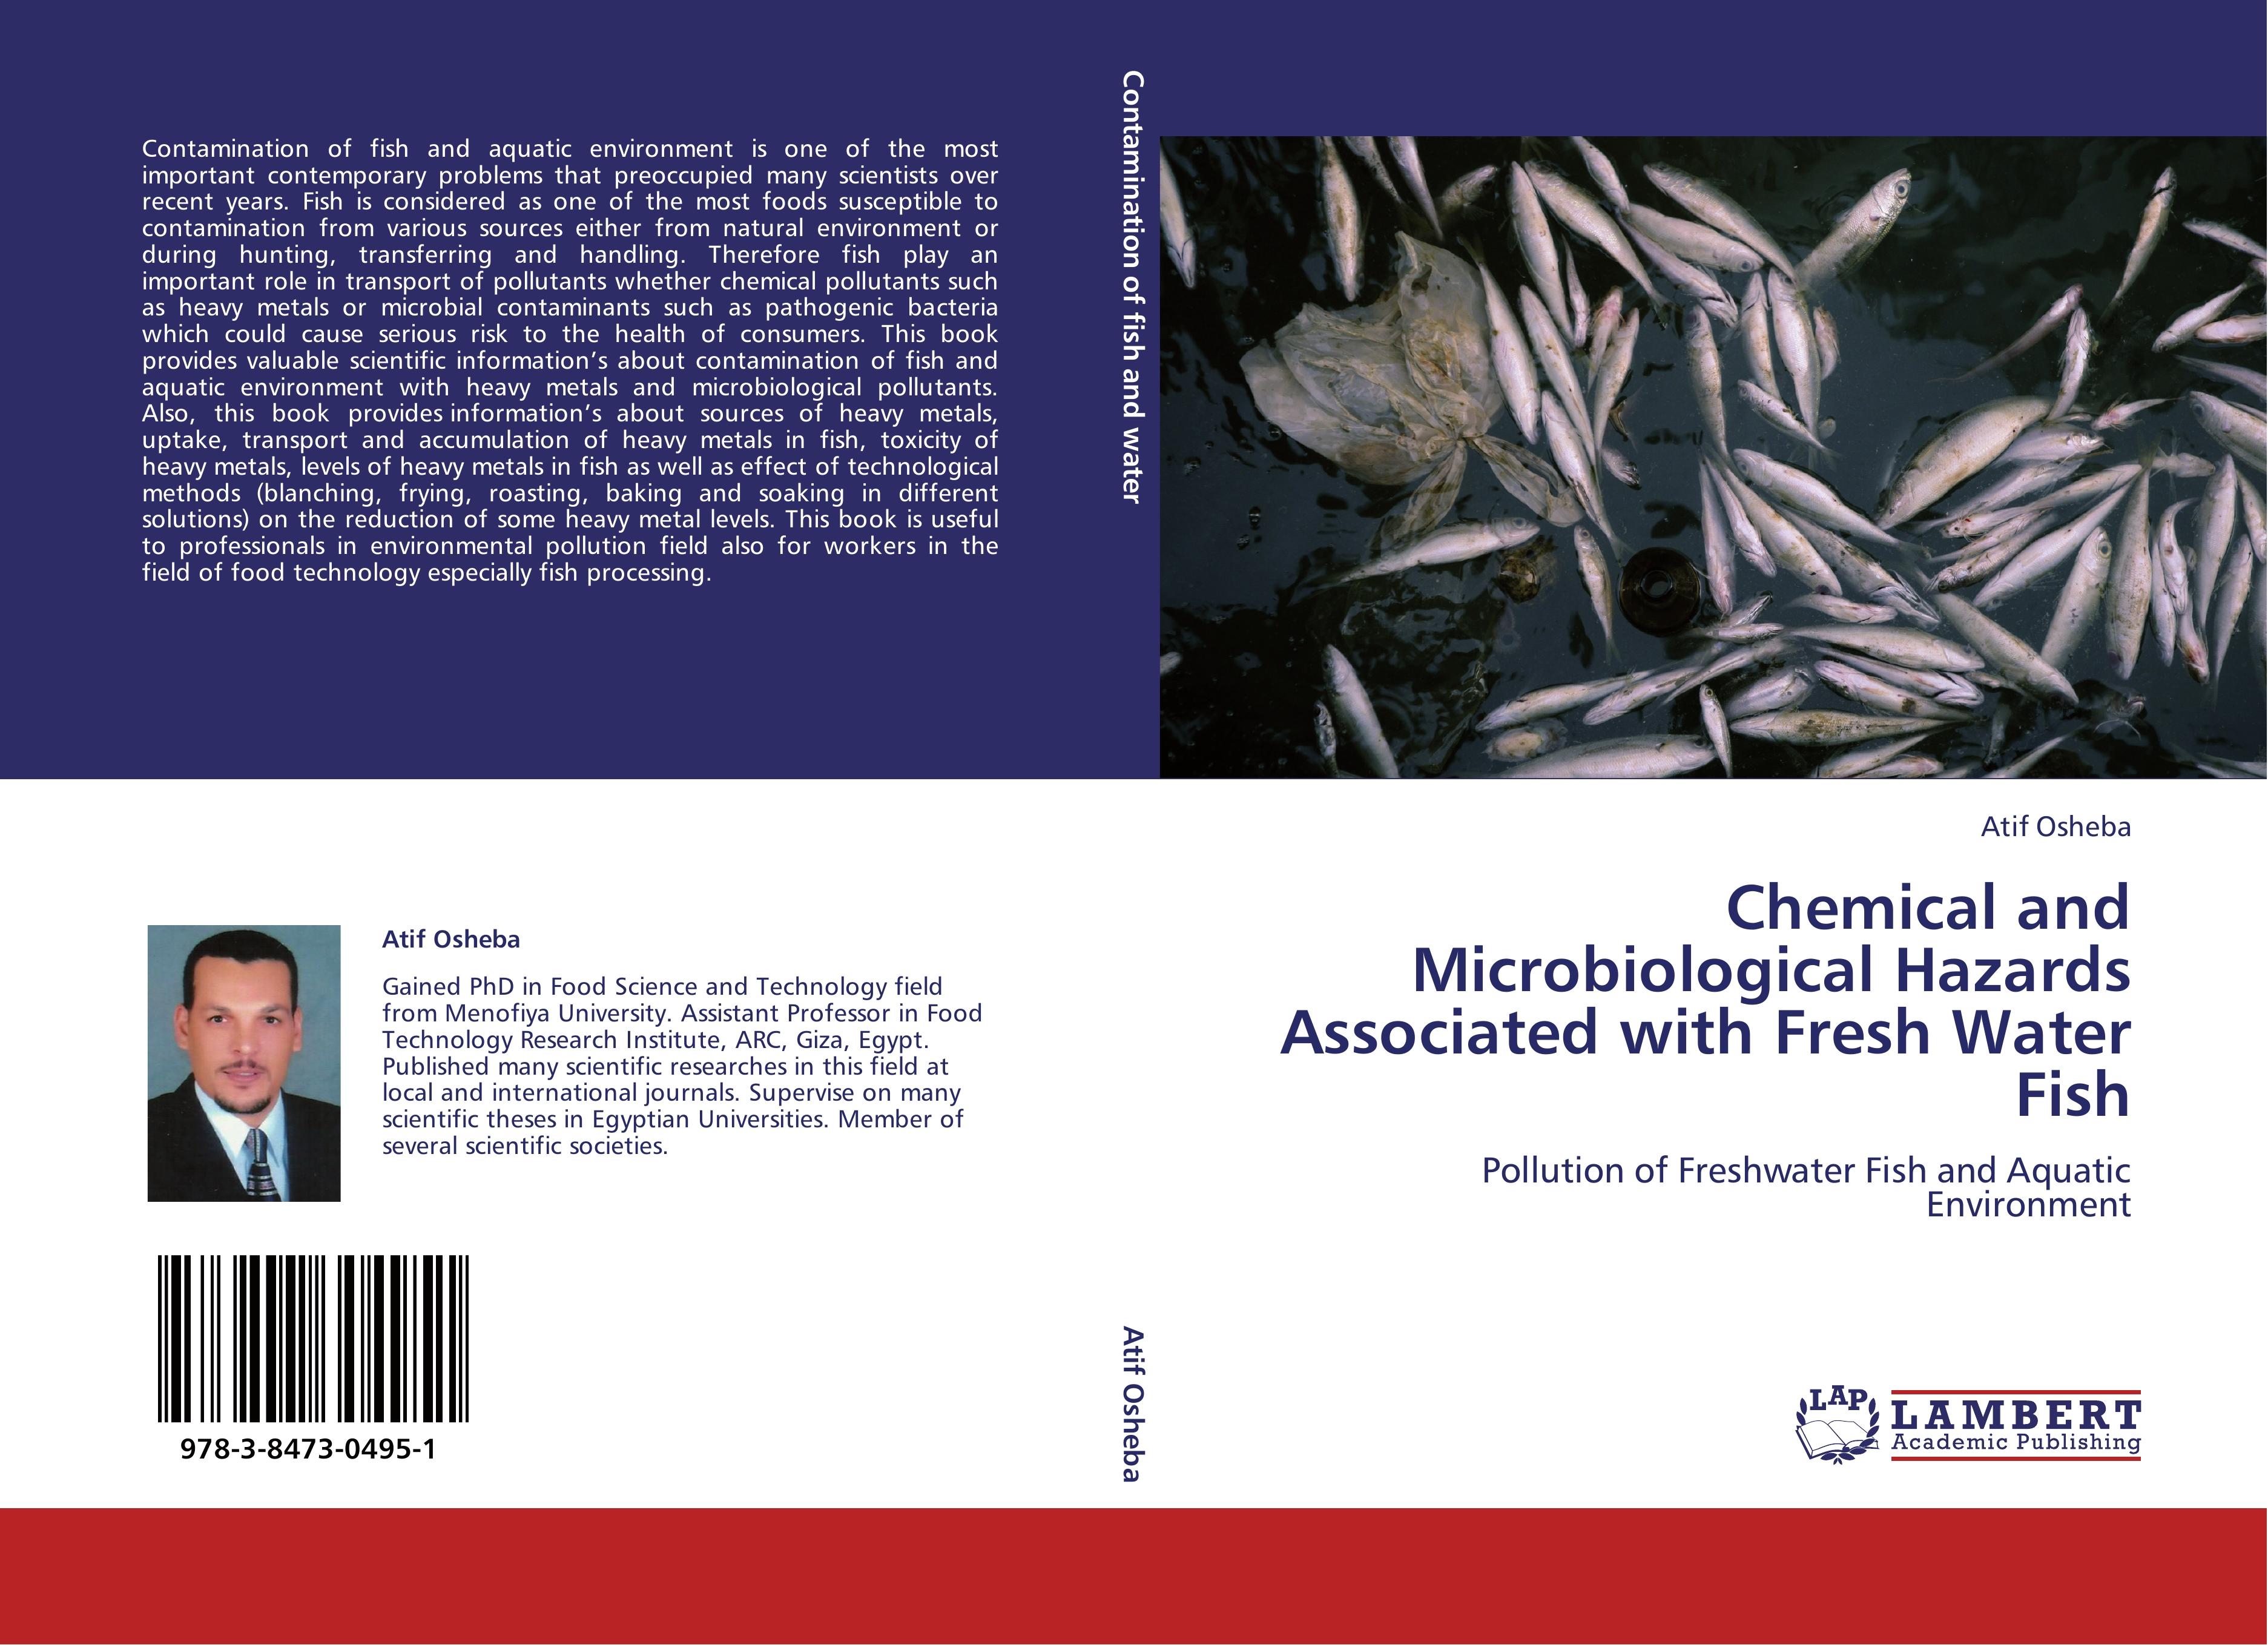 Chemical and Microbiological Hazards Associated with Fresh Water Fish - Atif Osheba